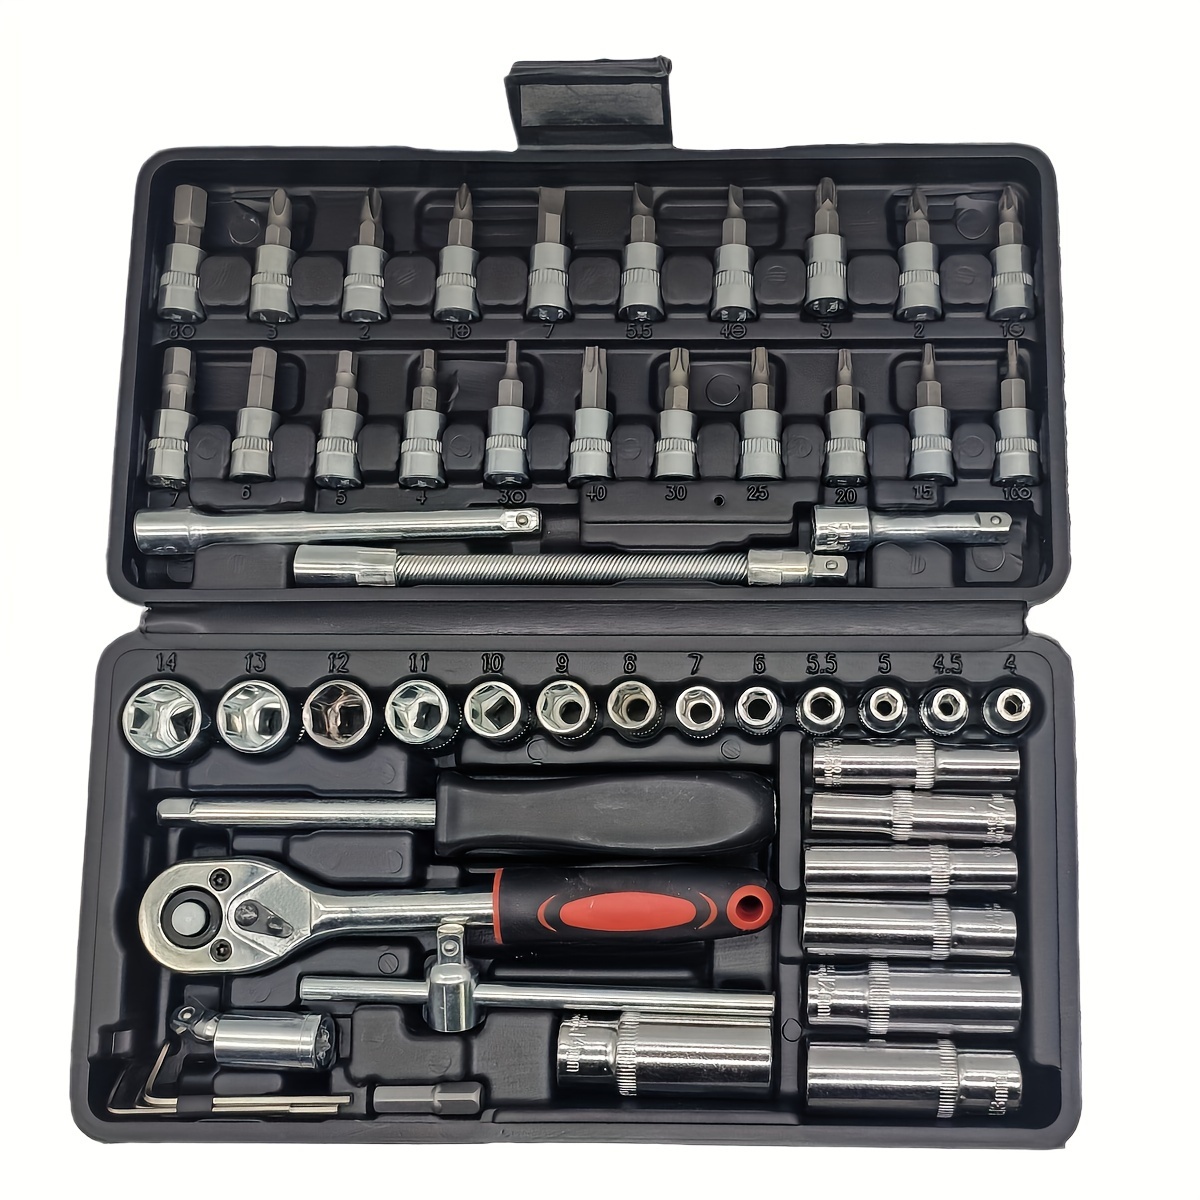 

53pcs, 1/4 Inch Drive Socket Ratchet Wrench Set, With Bit Socket Set Metric And Extension Bar For Auto Repairing And Household, With Storage Case